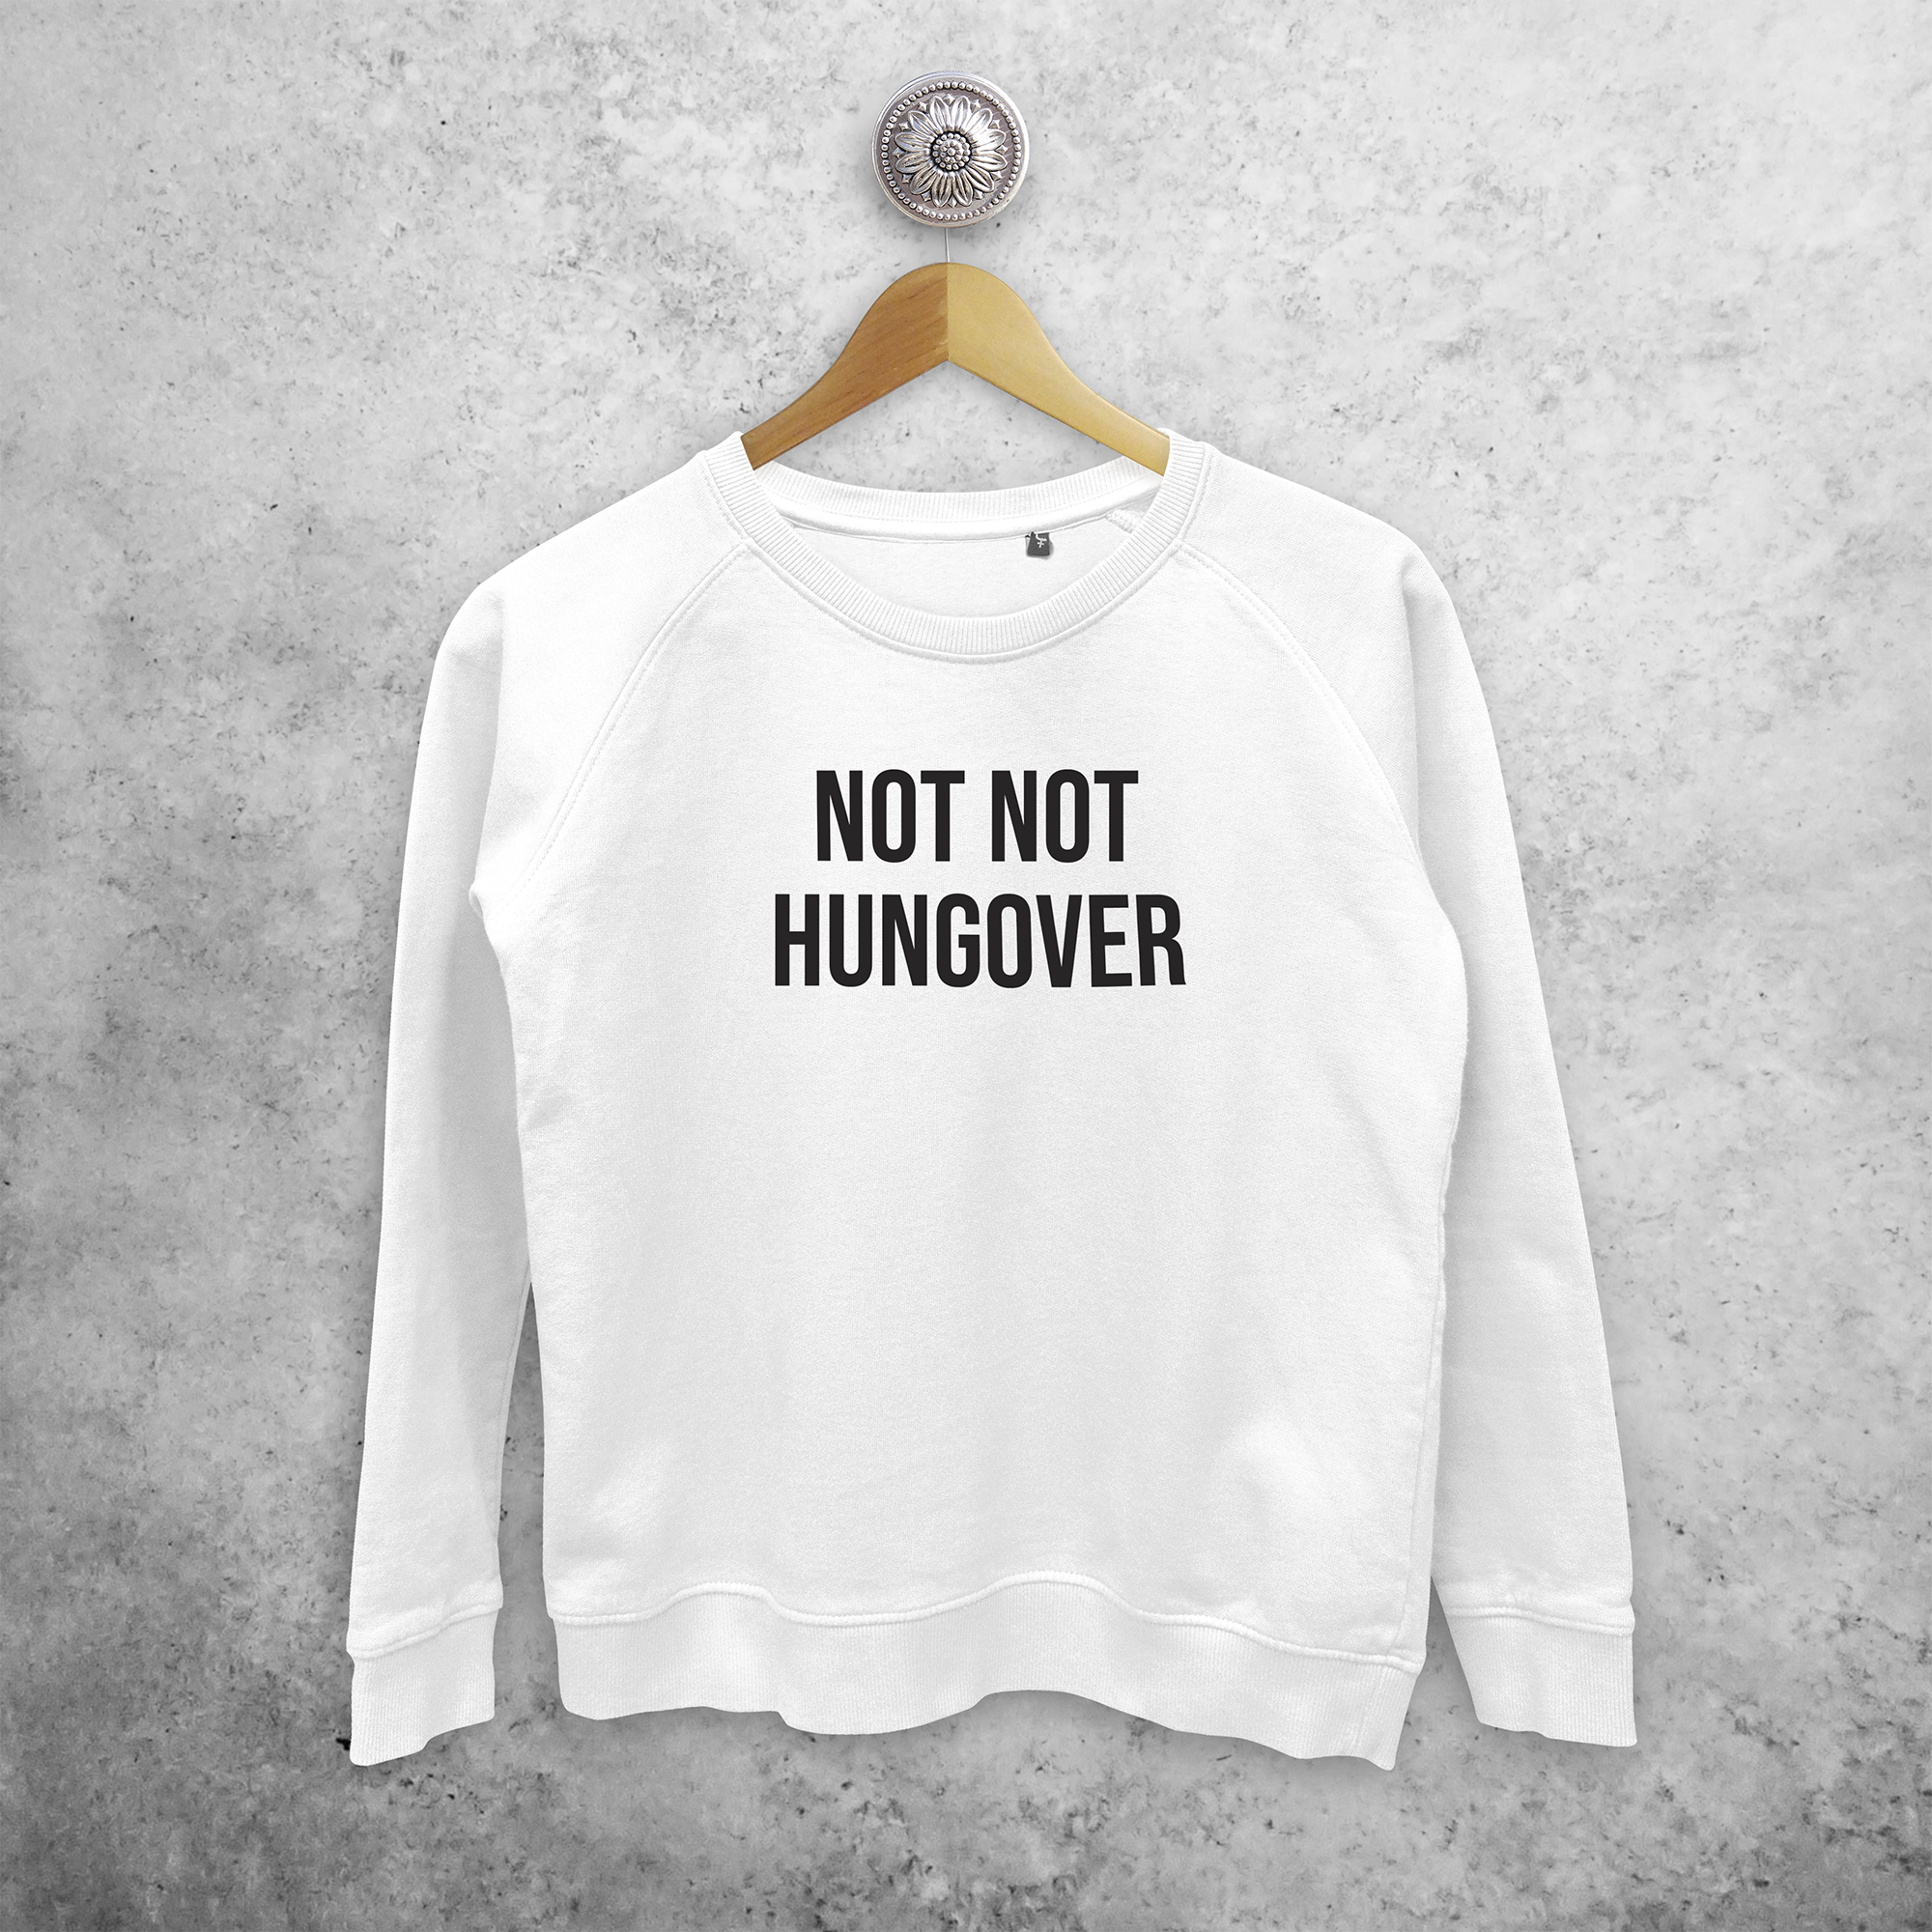 'Not not hungover' sweater